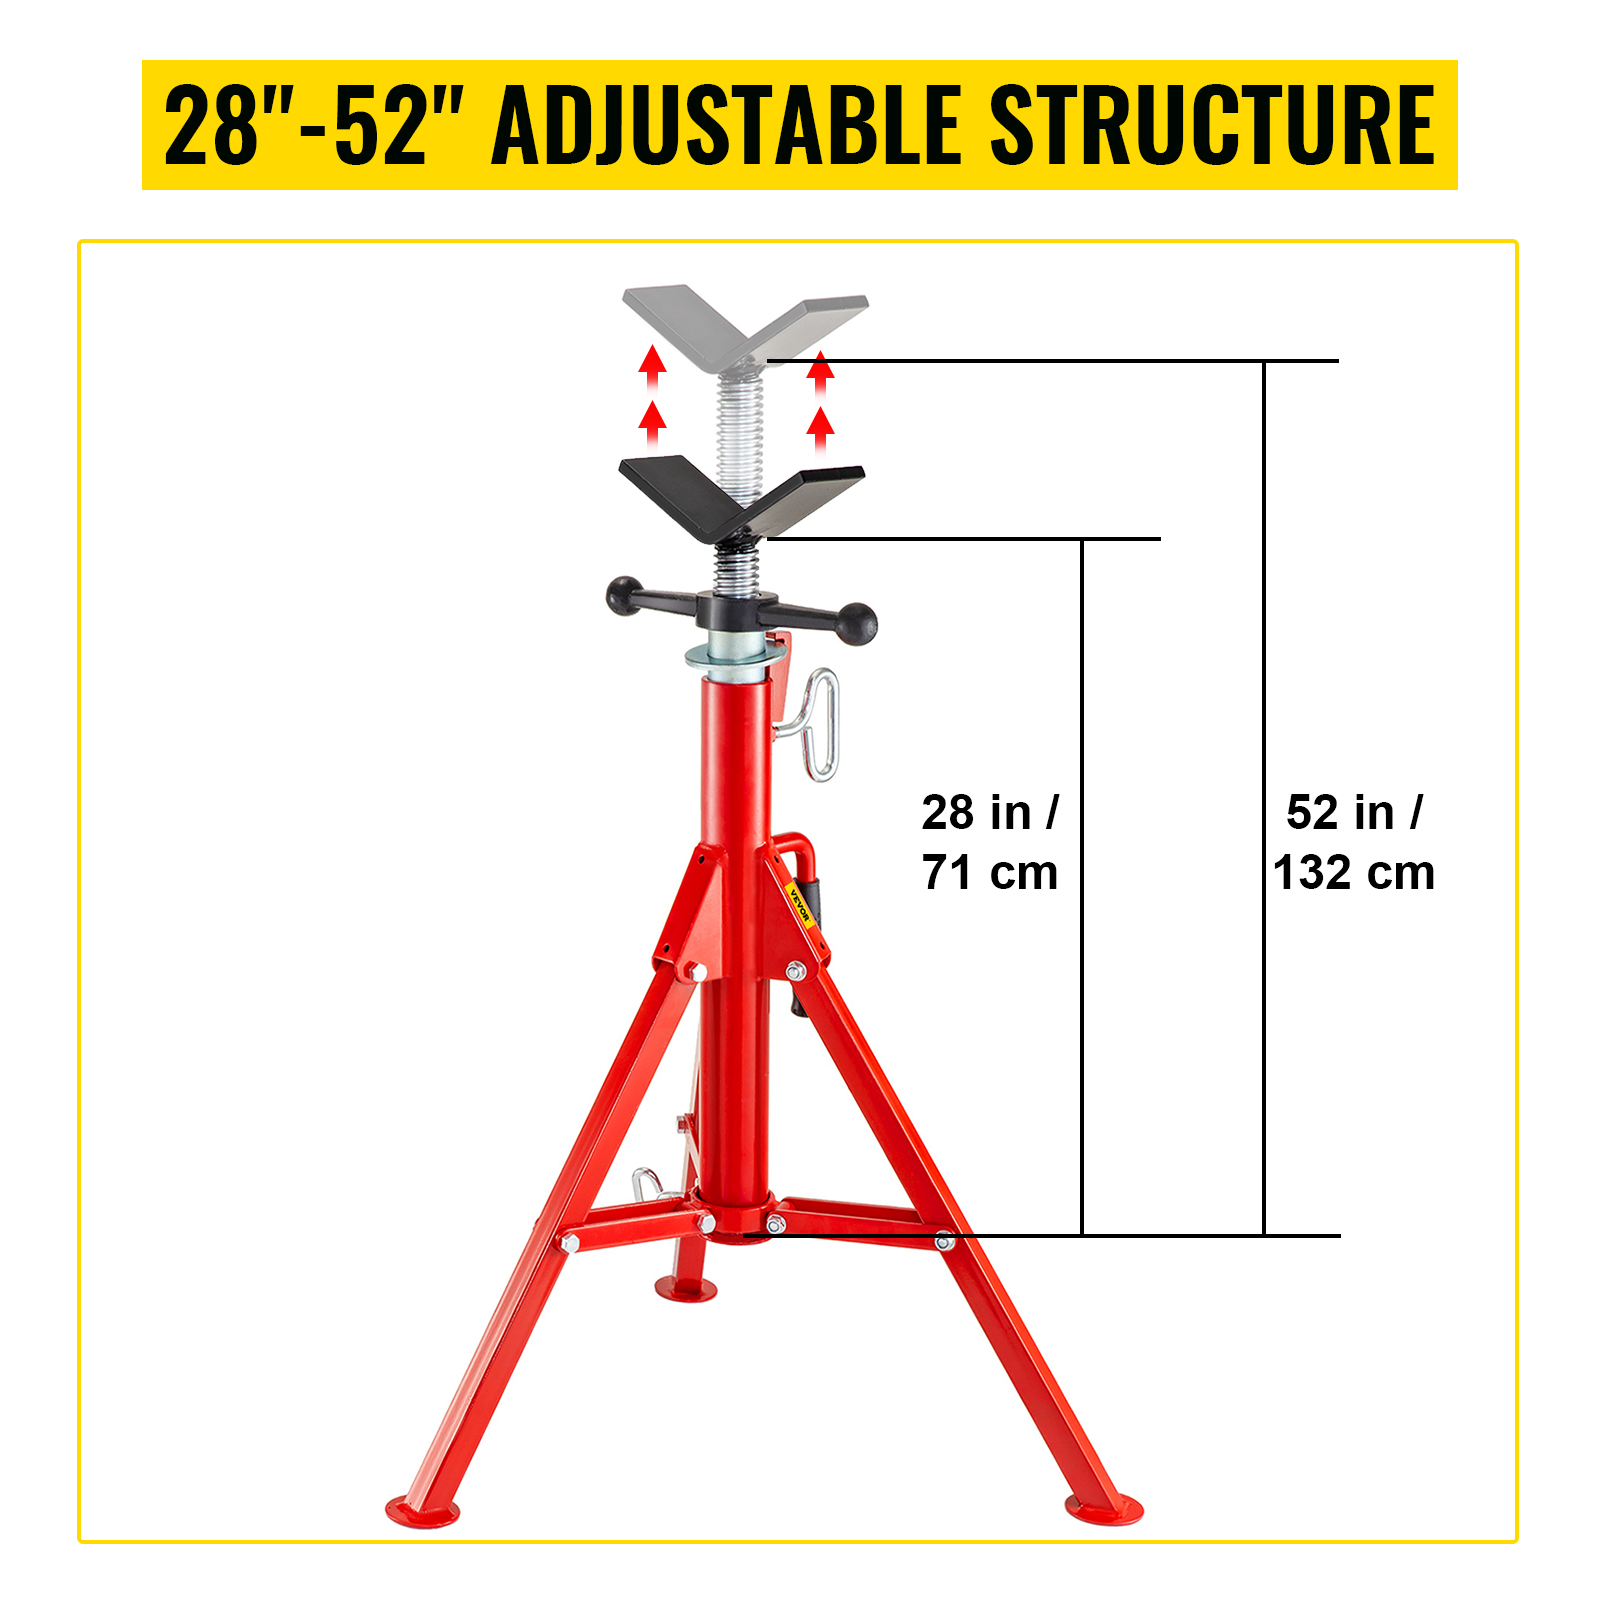 Pipe Stand 2-Ball Transfer Head Foldable Tripod Jack 28"-52" Height 2500Lb 